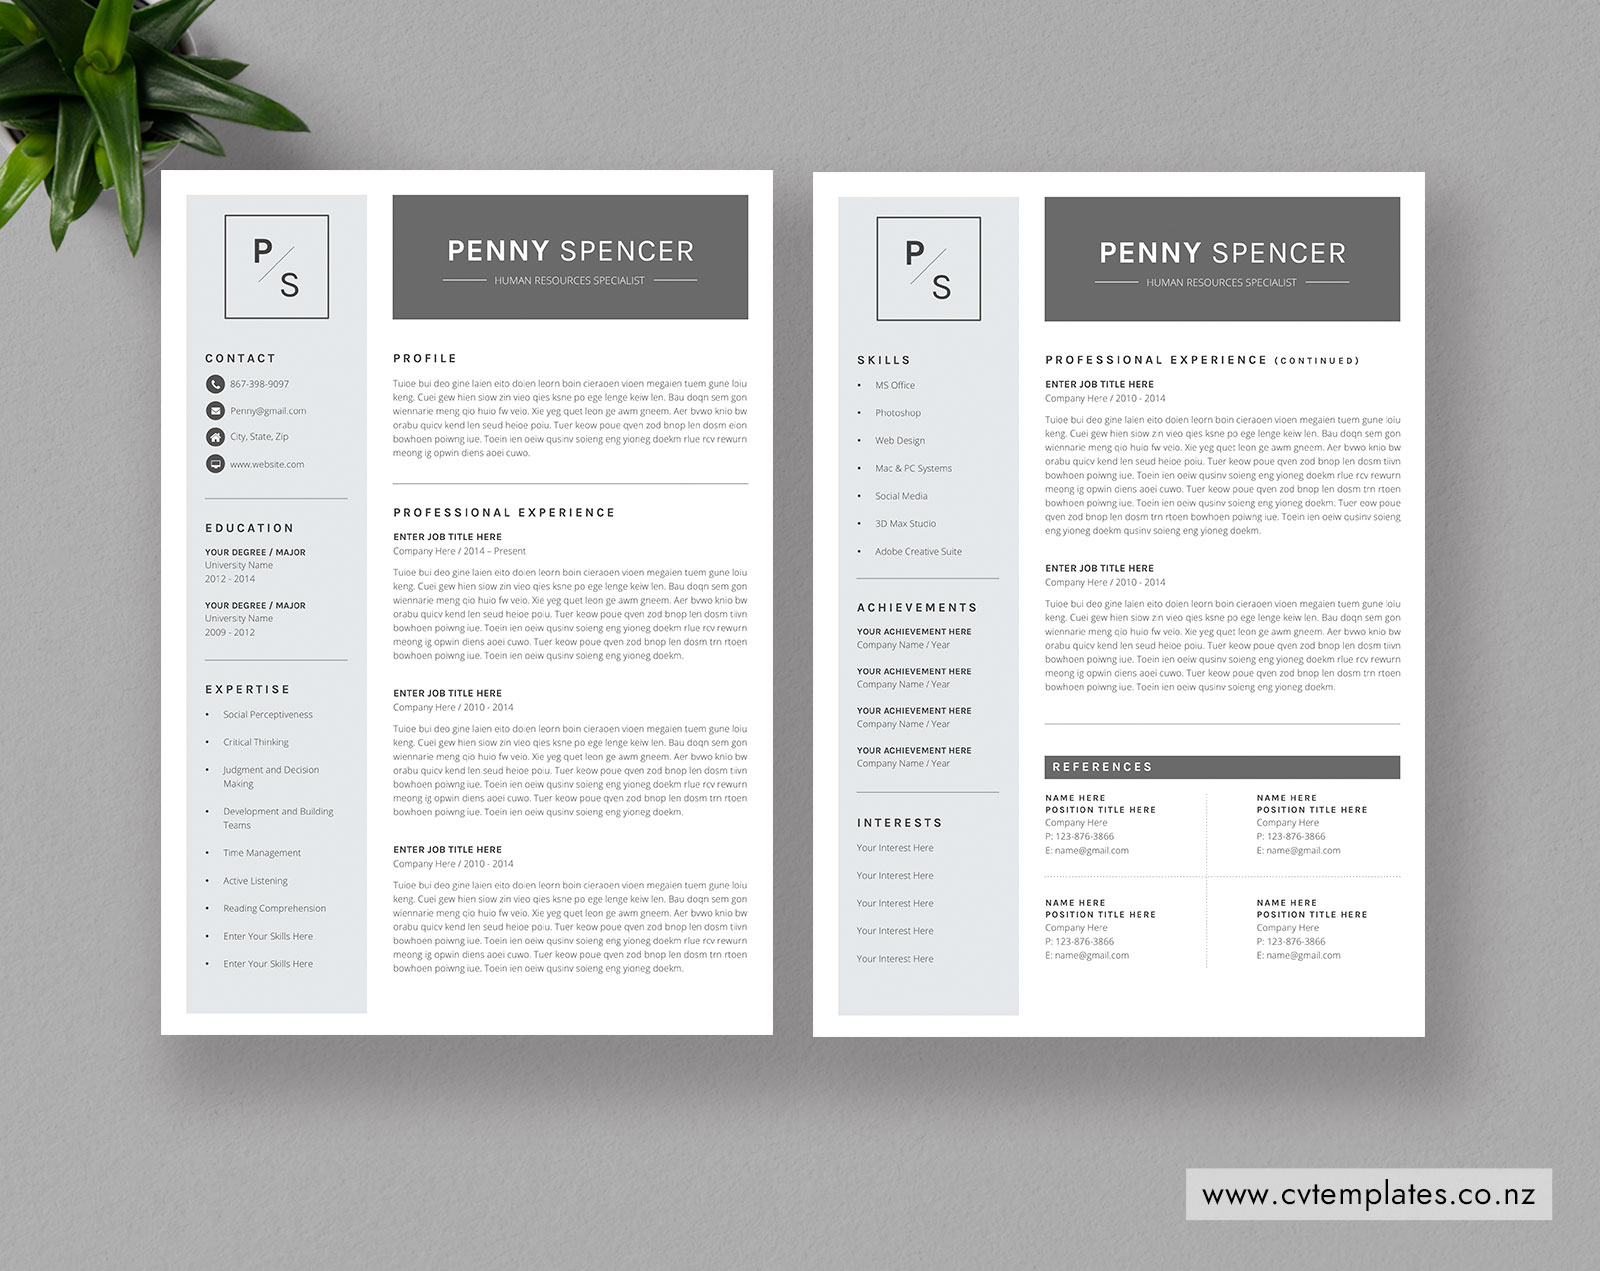 Cv Template For Ms Word Curriculum Vitae Unique Cv Template Editable Cv Template Cover Letter 1 2 And 3 Page Resume Simple And Professional Resume Template Instant Download Cvtemplates Co Nz